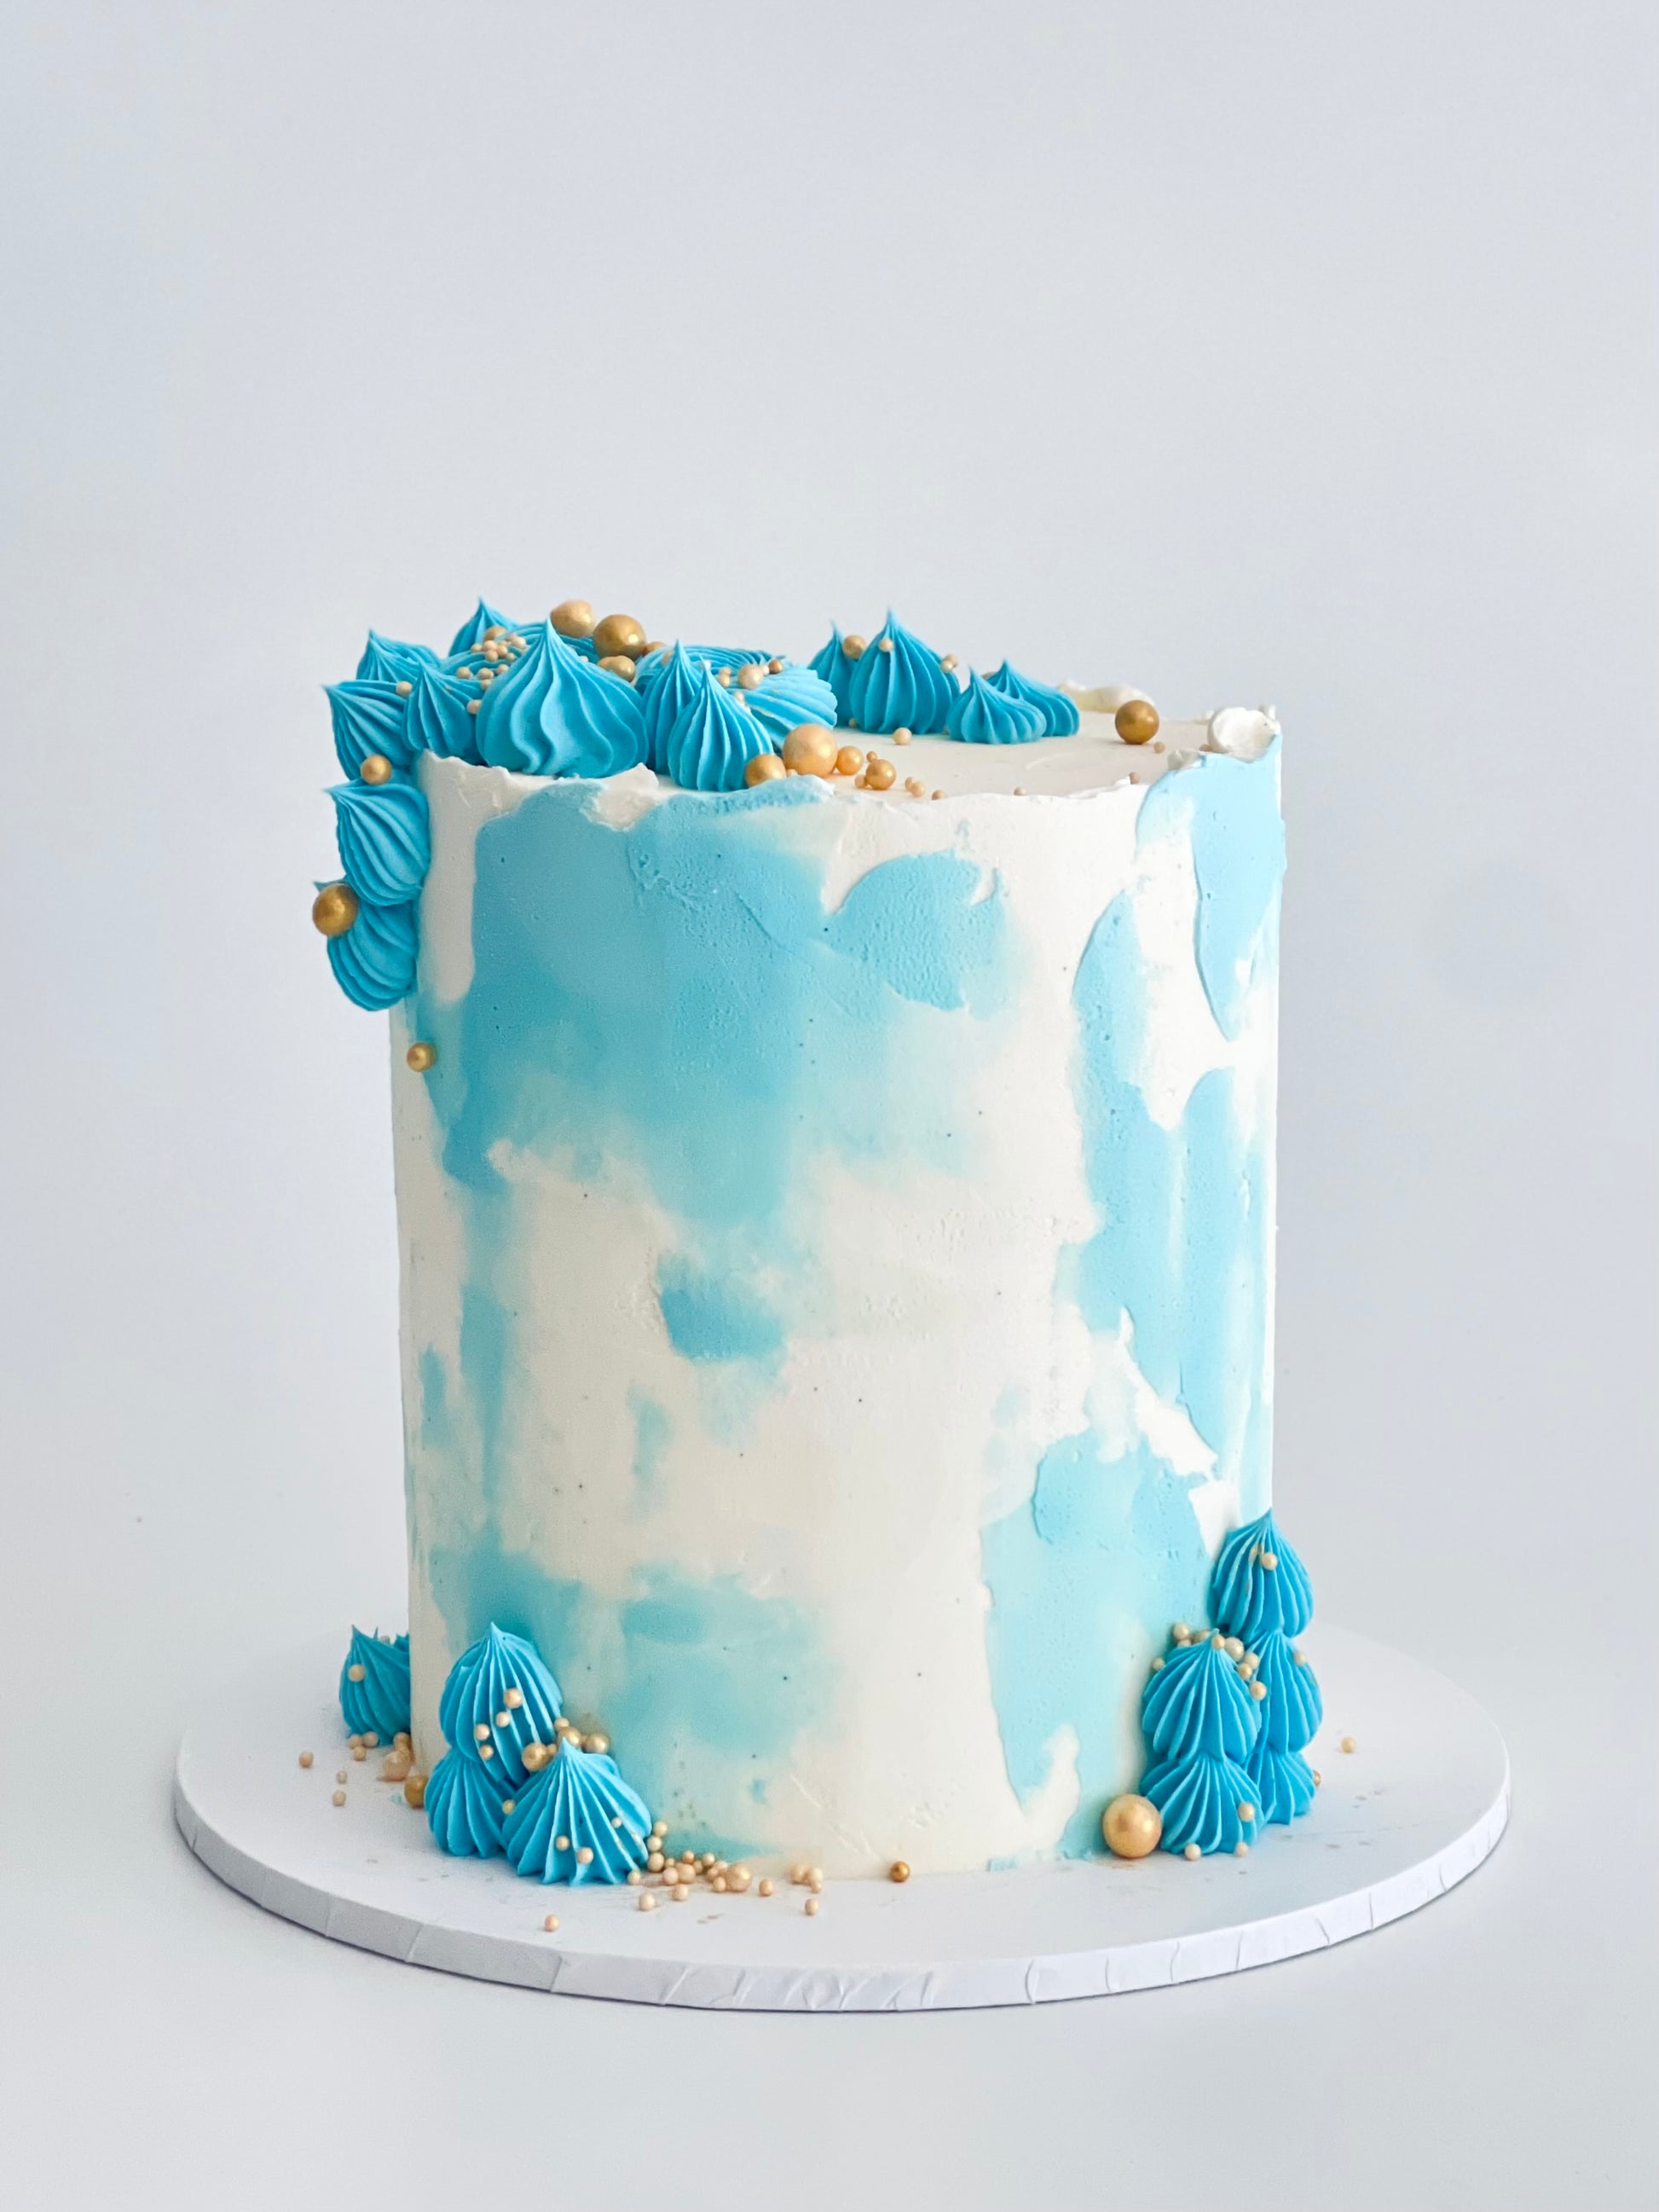 cake with blue touches and piping, finished with gold sprinkles